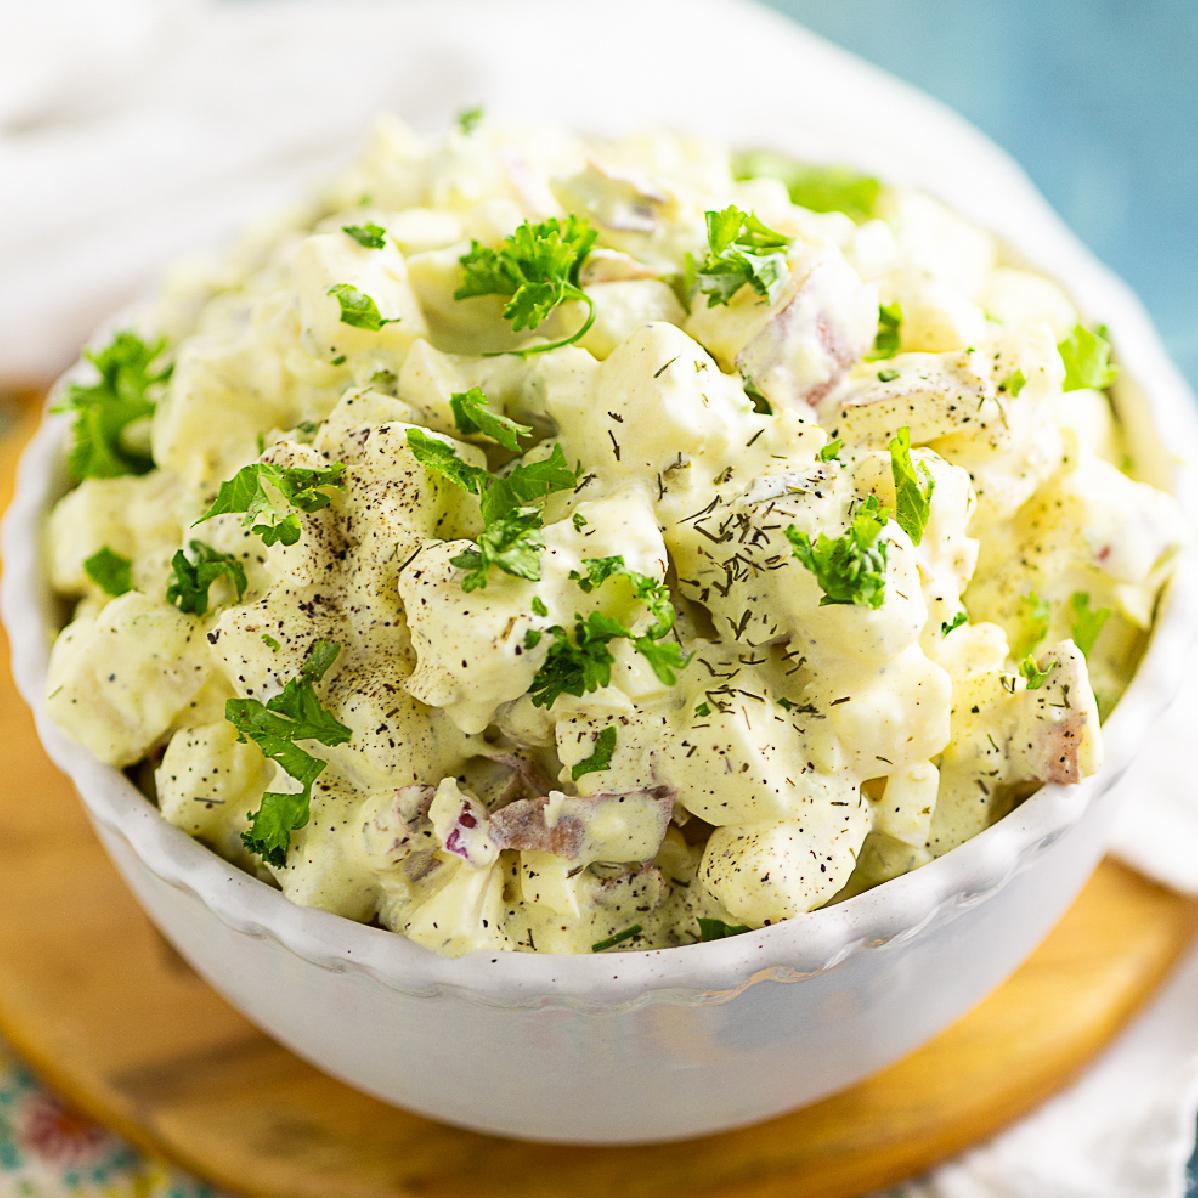  A refreshing and palate-cleansing combination of celery, onions, and mayo